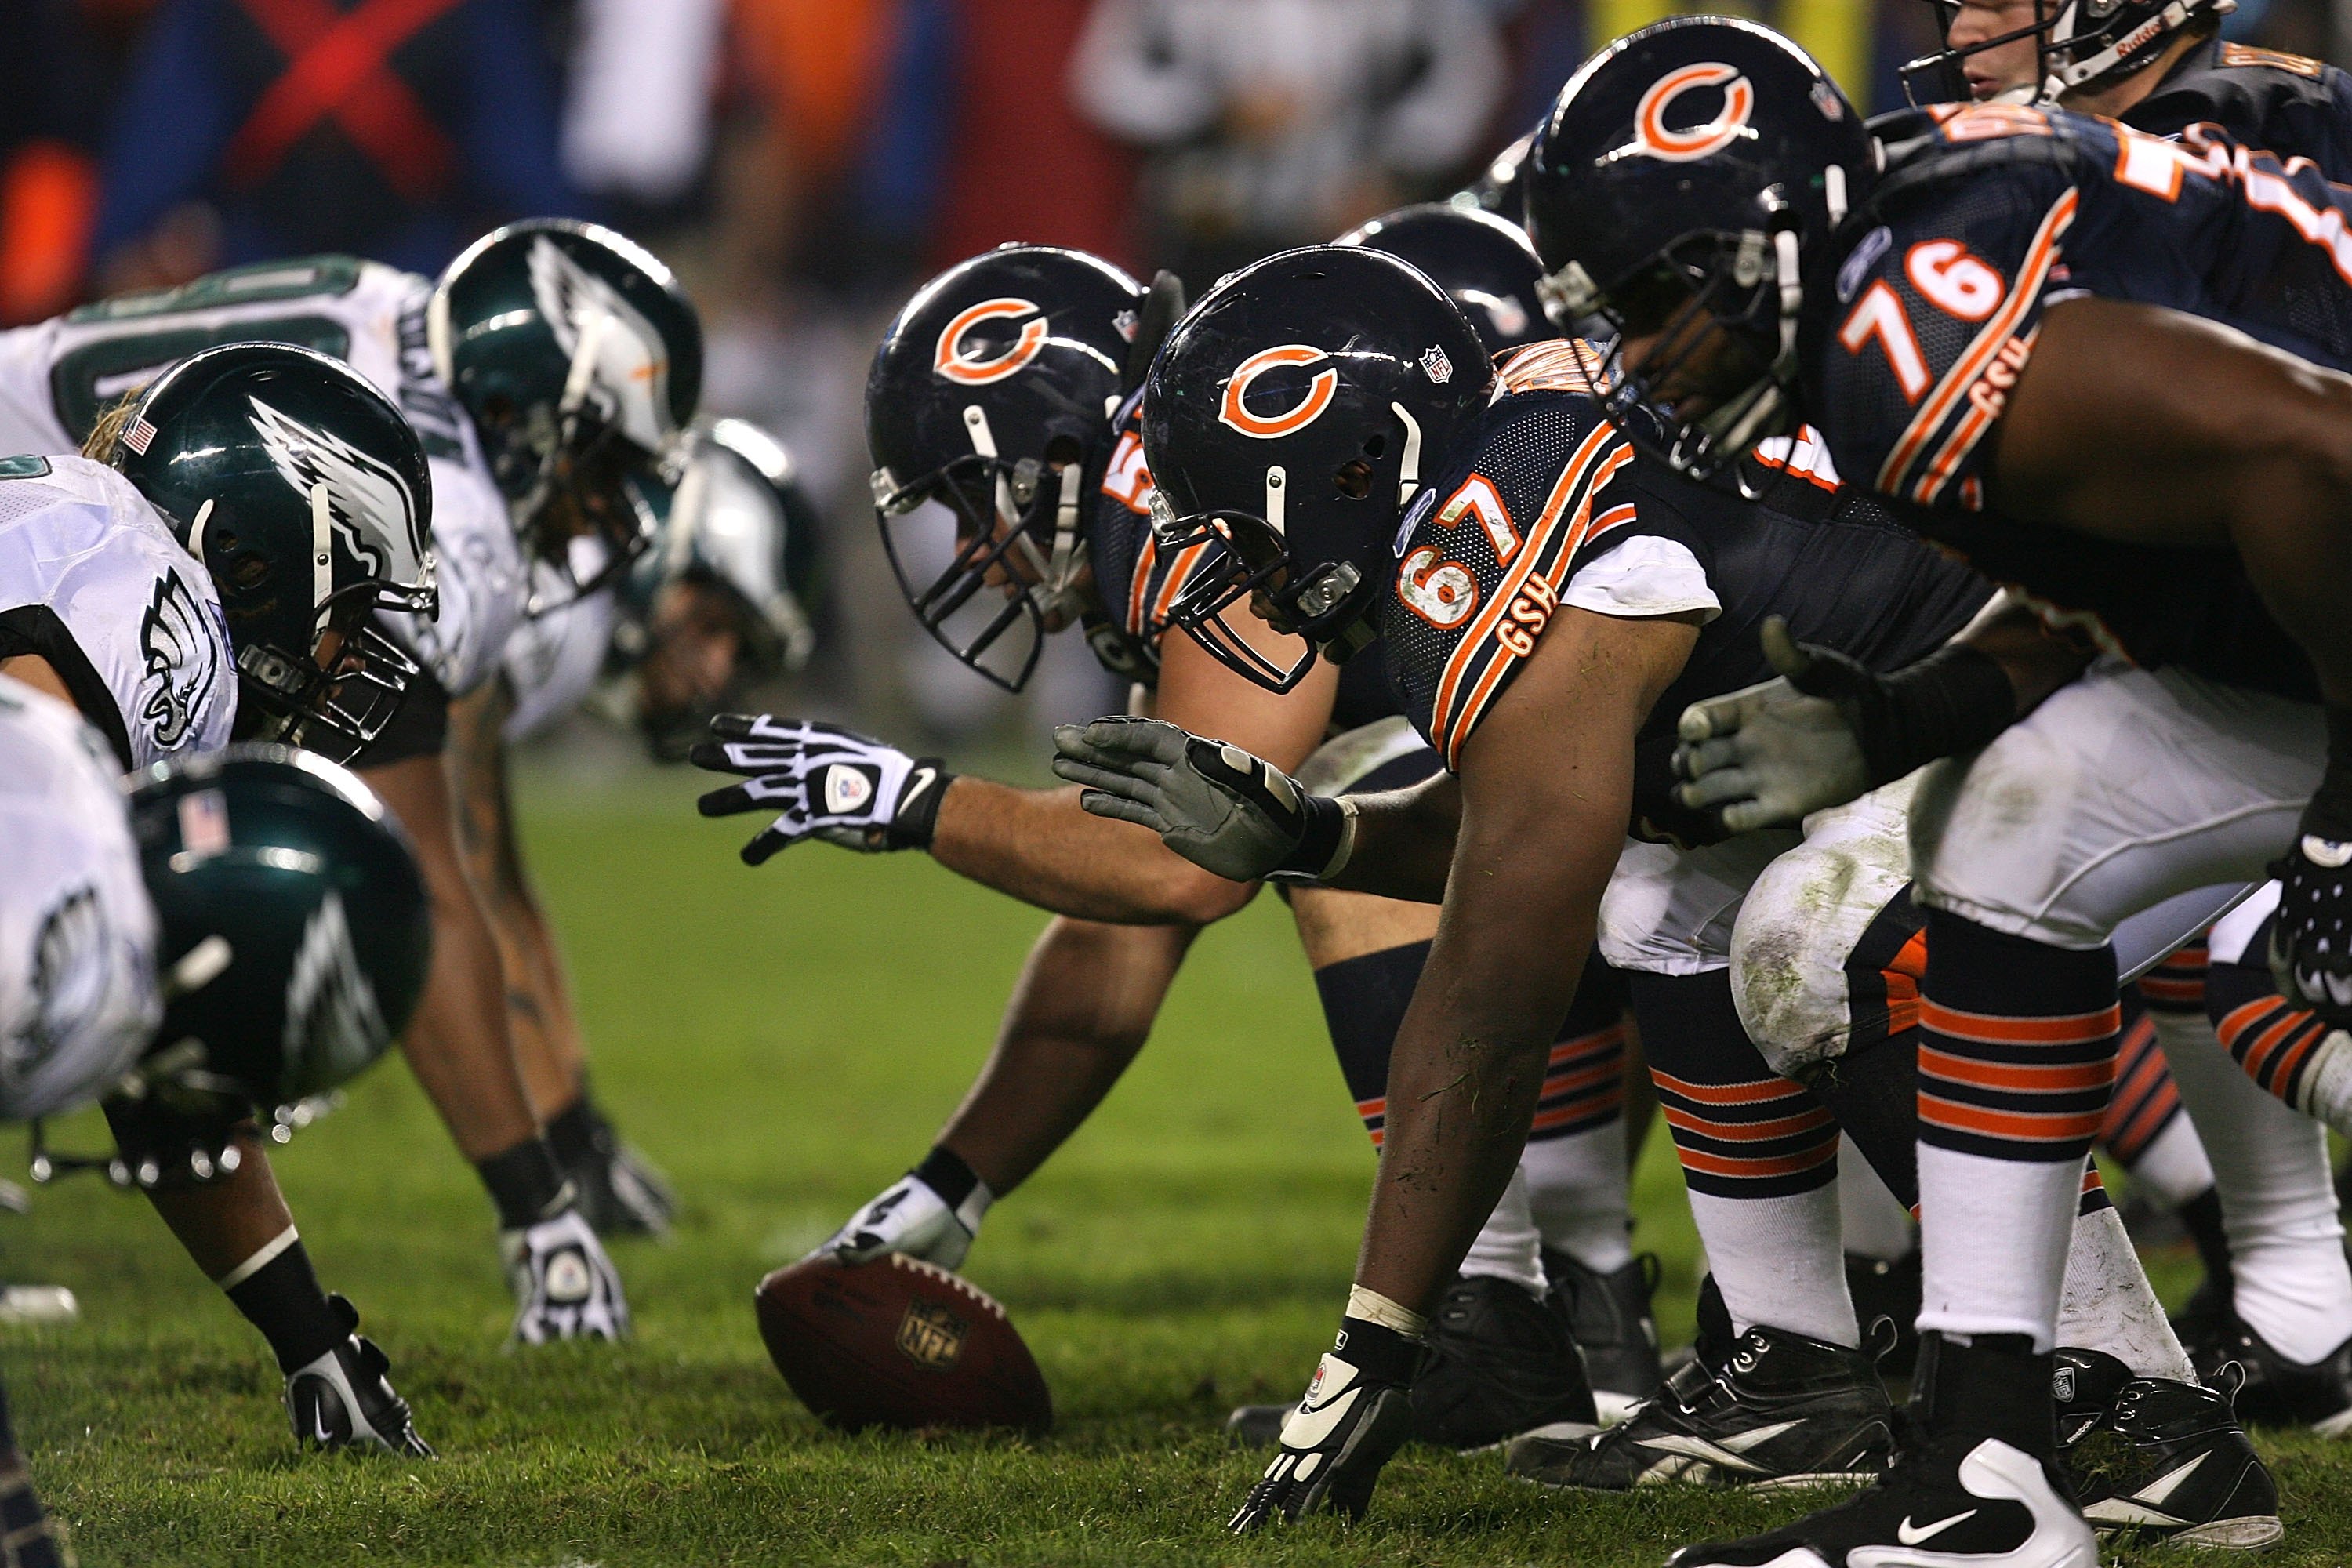 Bears vs. Eagles What To Expect and Who Will Win When Vick Comes to